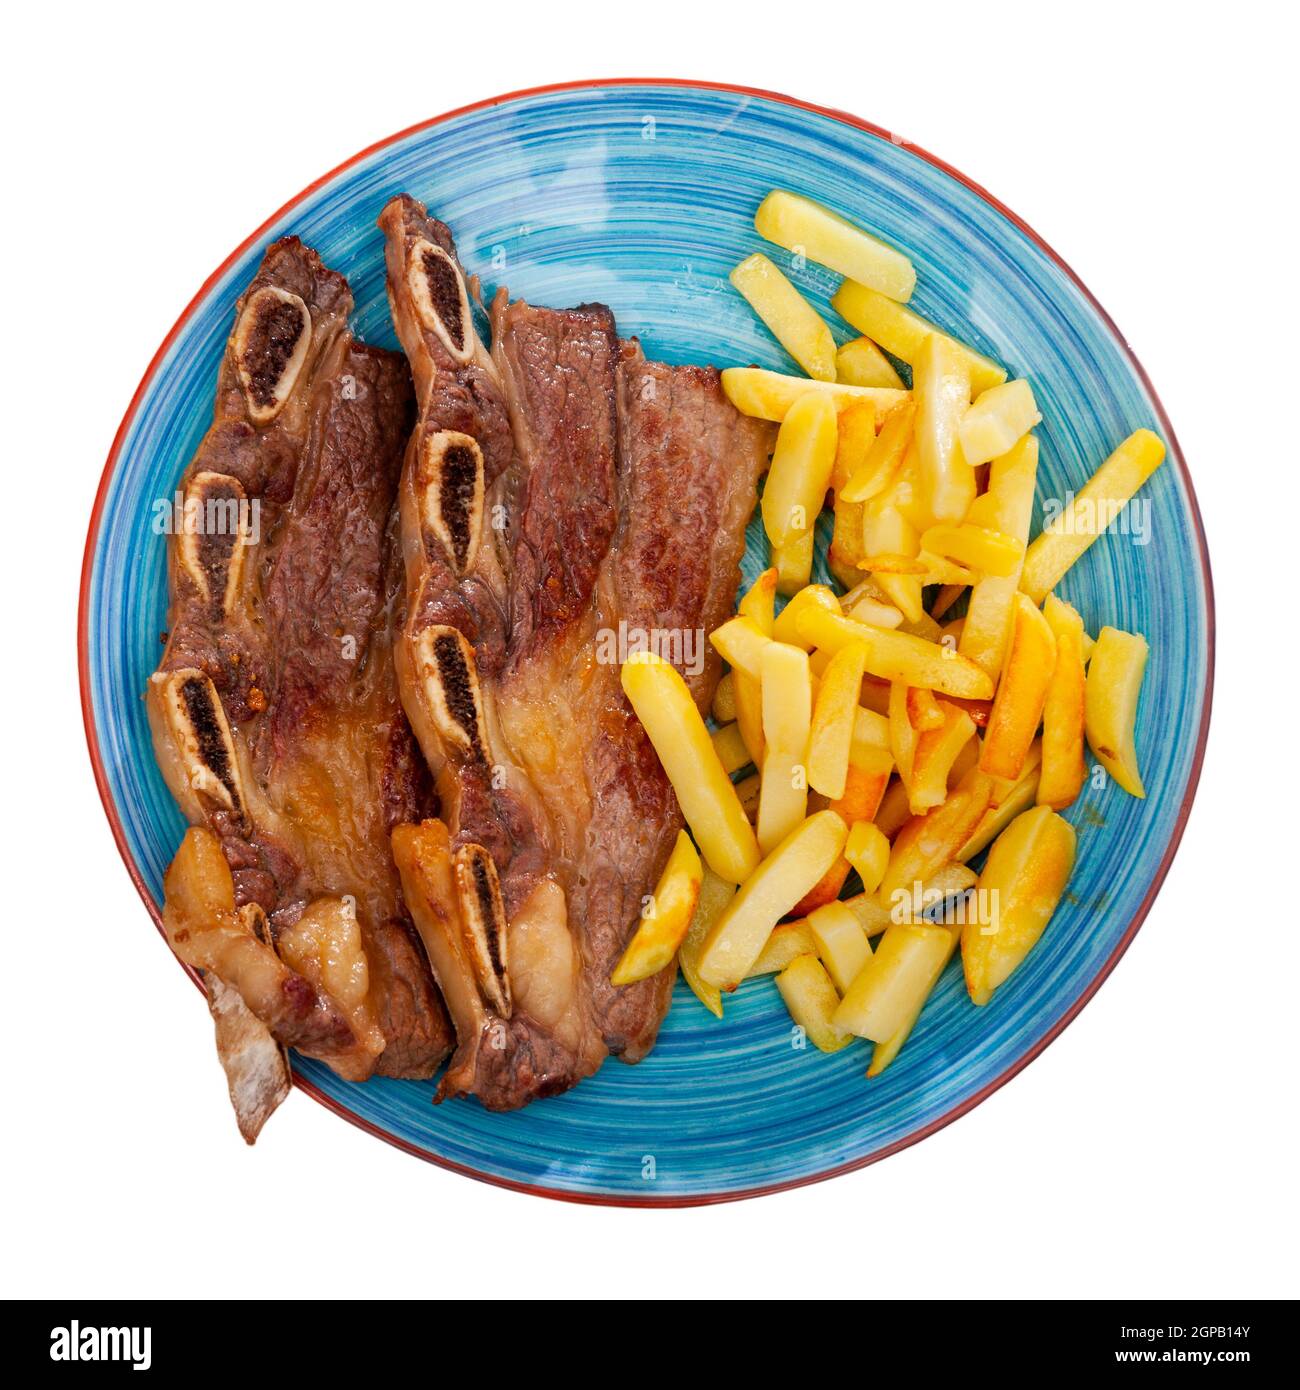 Grilled beef ribs with vegetable garnish of french fries Stock Photo